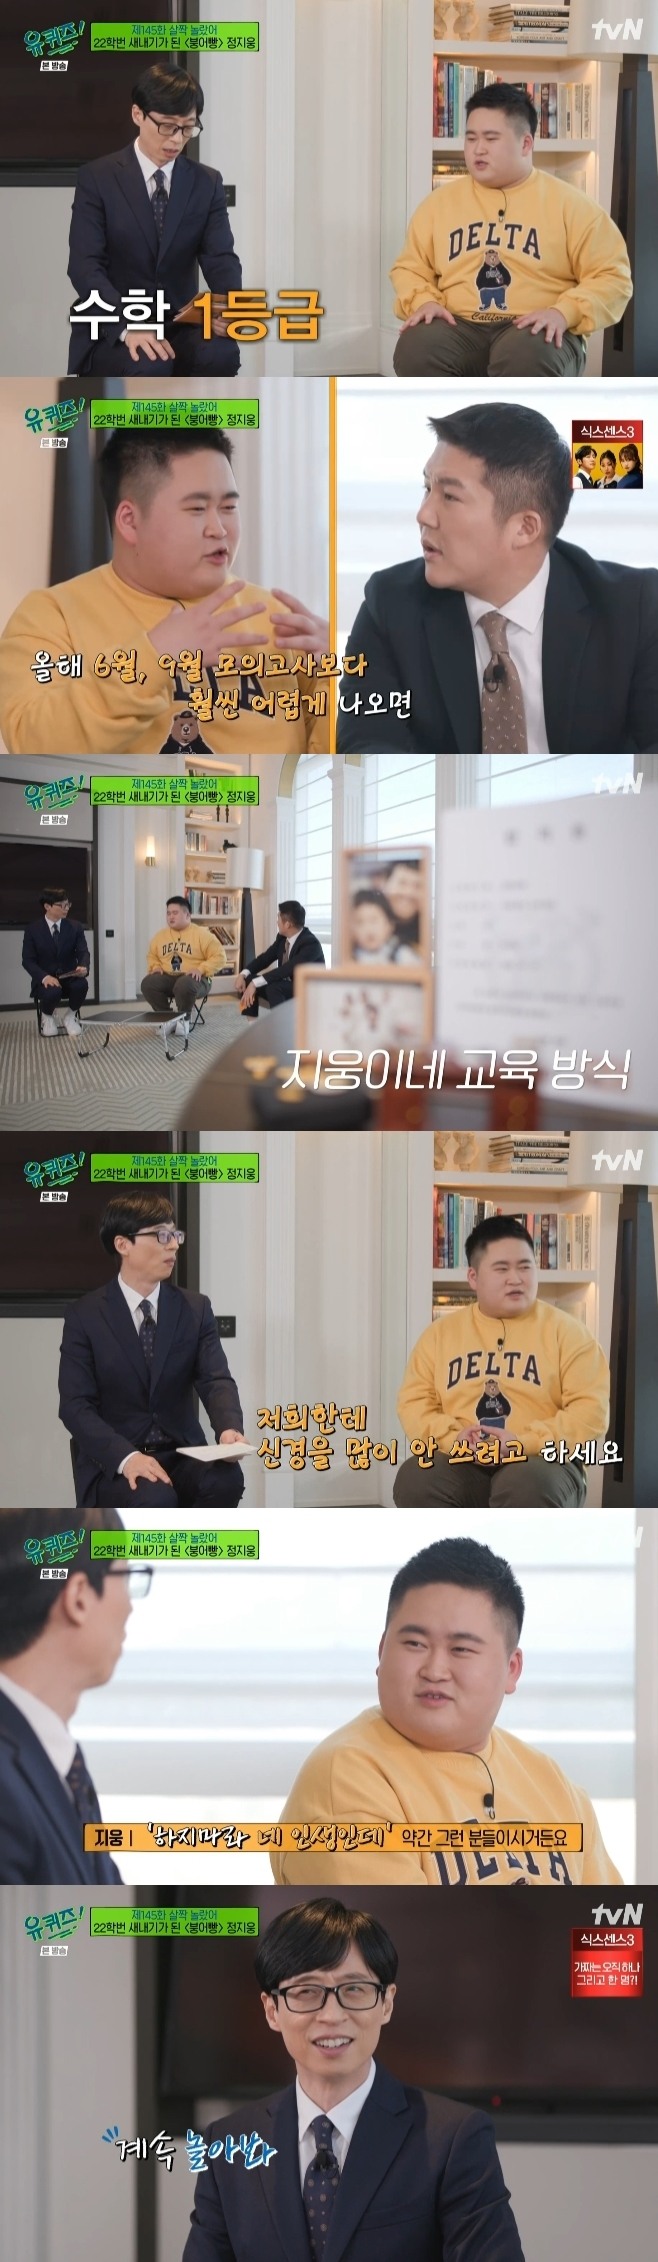 In You Quiz on the Block, Jung Jung-woong, the son of actor Jung Eun-pyo, revealed the passing of Seoul National University.In the TVN entertainment program You Quiz on the Block broadcasted on the evening of the 16th, Jung Eun-pyos son Jung Woong appeared as a guest and told his story.Recently, Jung Woong has received a congratulatory message from Seoul National University through the video of YouTube Channel Jung Eun-pyo.I was known through the article, but it is really a entertainment industry sergeant, said Yoo Jae-Suk. I actually did not know how to stick.I thought I should go to Seoul National University while working really hard for a year, but I am honored to pass this.I think it is not over after the entrance examination is over. It is just over when I pass it, but I think that the one year of the long run is over.I was very cheered on the surrounding area. Especially, the actor Yu Hae-jin also congratulated me. Jung Eun-pyo said, I sent a letter to buy pork belly.In fact, Haejin has a story with Jiwoong. When Jiwoong passed 100 days, he threw up in his face.Hajin is very pretty at Ji Woong Lee. Sometimes it is hard, so I come and buy Chungkukjang. Especially, this year, it was difficult to be called the incompetence of the past, so the passing of Jung Woong was more meaningful. Jung Woong said, It was incompetent, so 12 ~ 13 were wrong.India was so good that it was only one wrong, but it was a second grade. Jung Ji-woong also talked about the way his parents were educated.My parents are trying not to pay much attention to us, said Jung Woong. If we want to do something, we will do it as much as possible.Even if you do not study, you said, Do not do it because it is your life. But Yoo Jae-Suk, who heard this, said, There is something in common with these people. If the children do well, their parents do not say anything.What if I just play all day? Jung Eun-pyo would not have done that, he said, making everyone laugh.